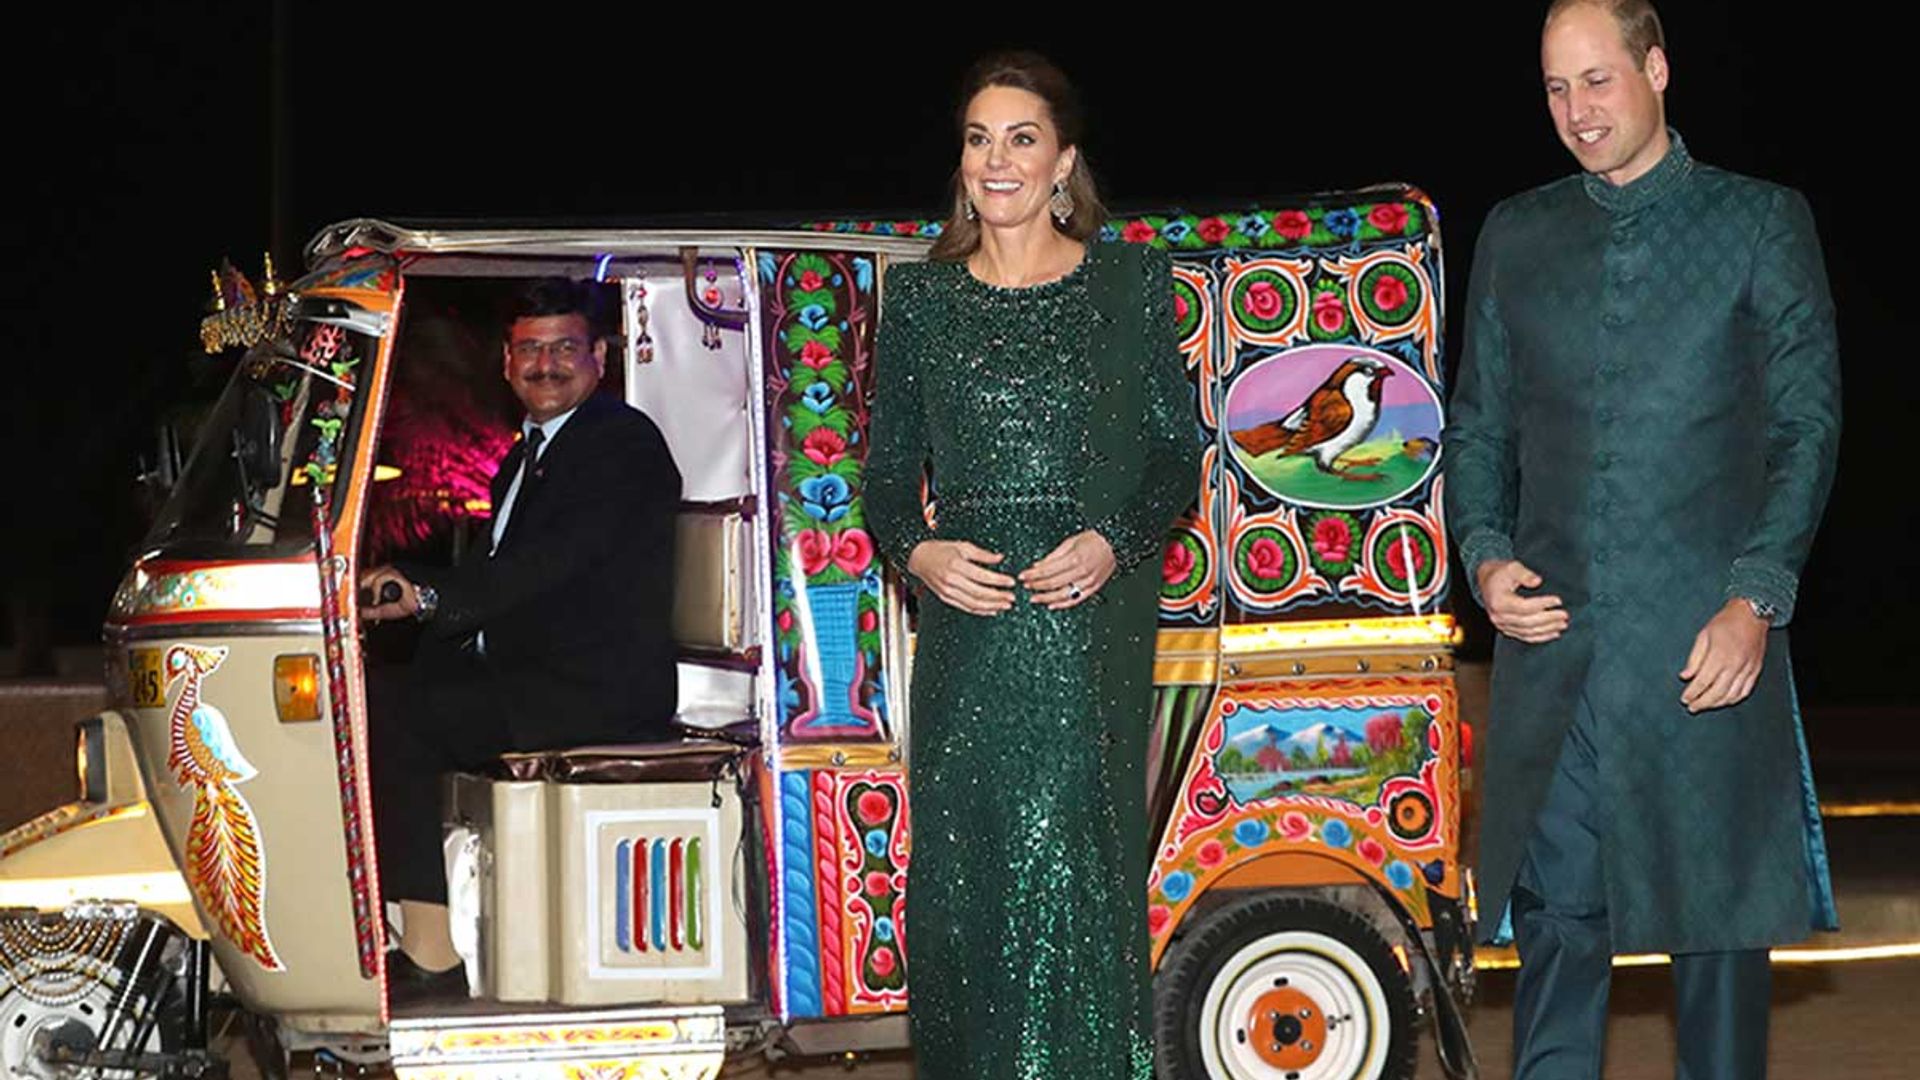 Royal tour day 2: Prince William and Kate Middleton dazzle at glamorous evening reception in Pakistan - best photos